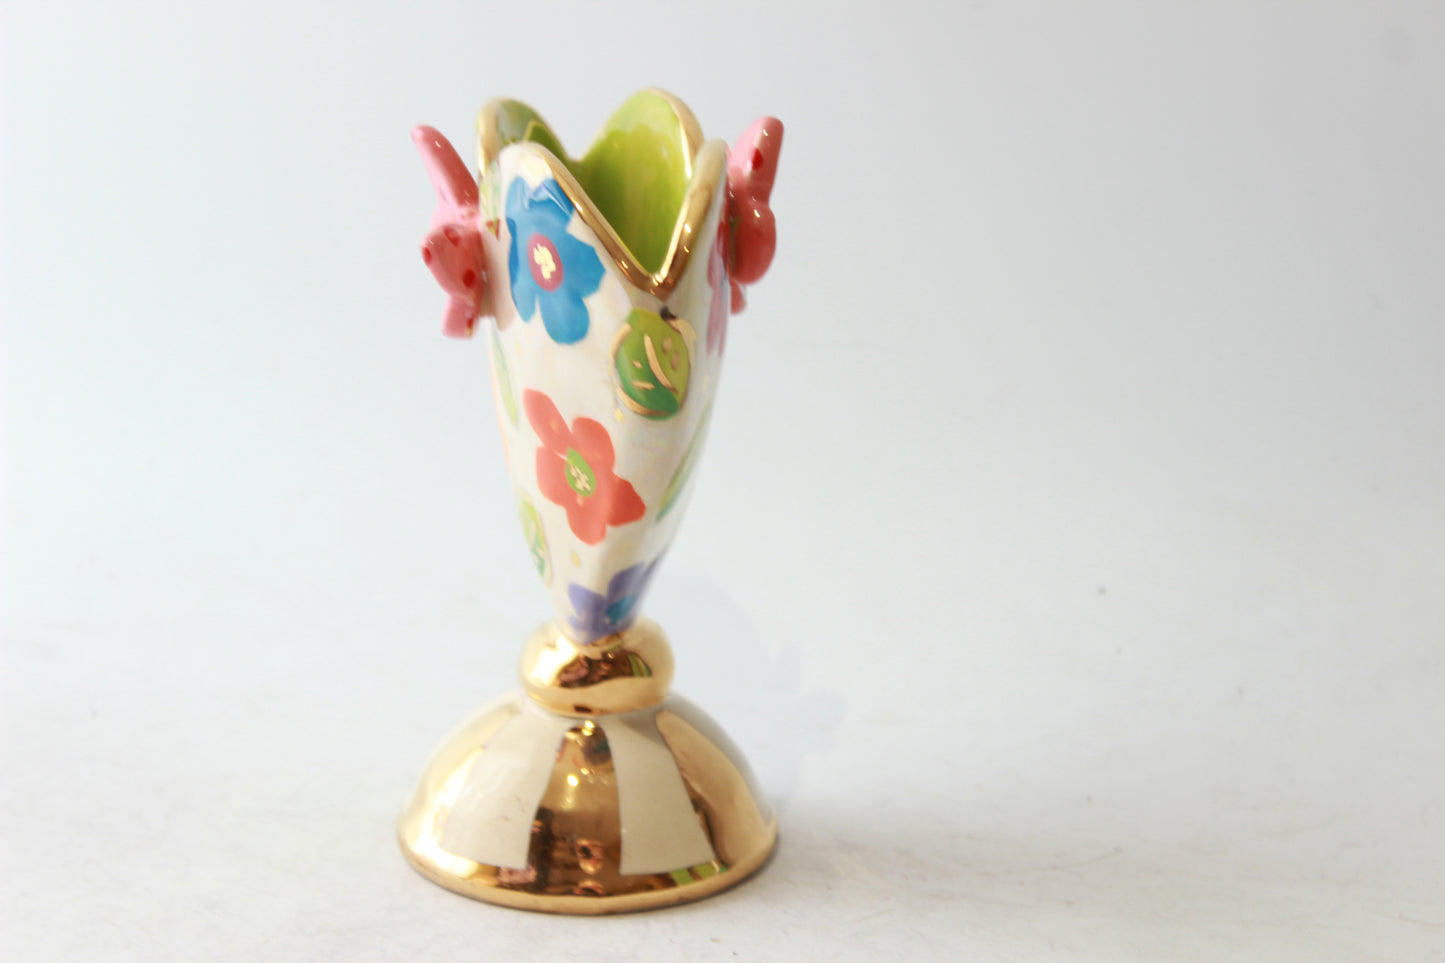 Baby Heart Vase with Butterflies and Daisies